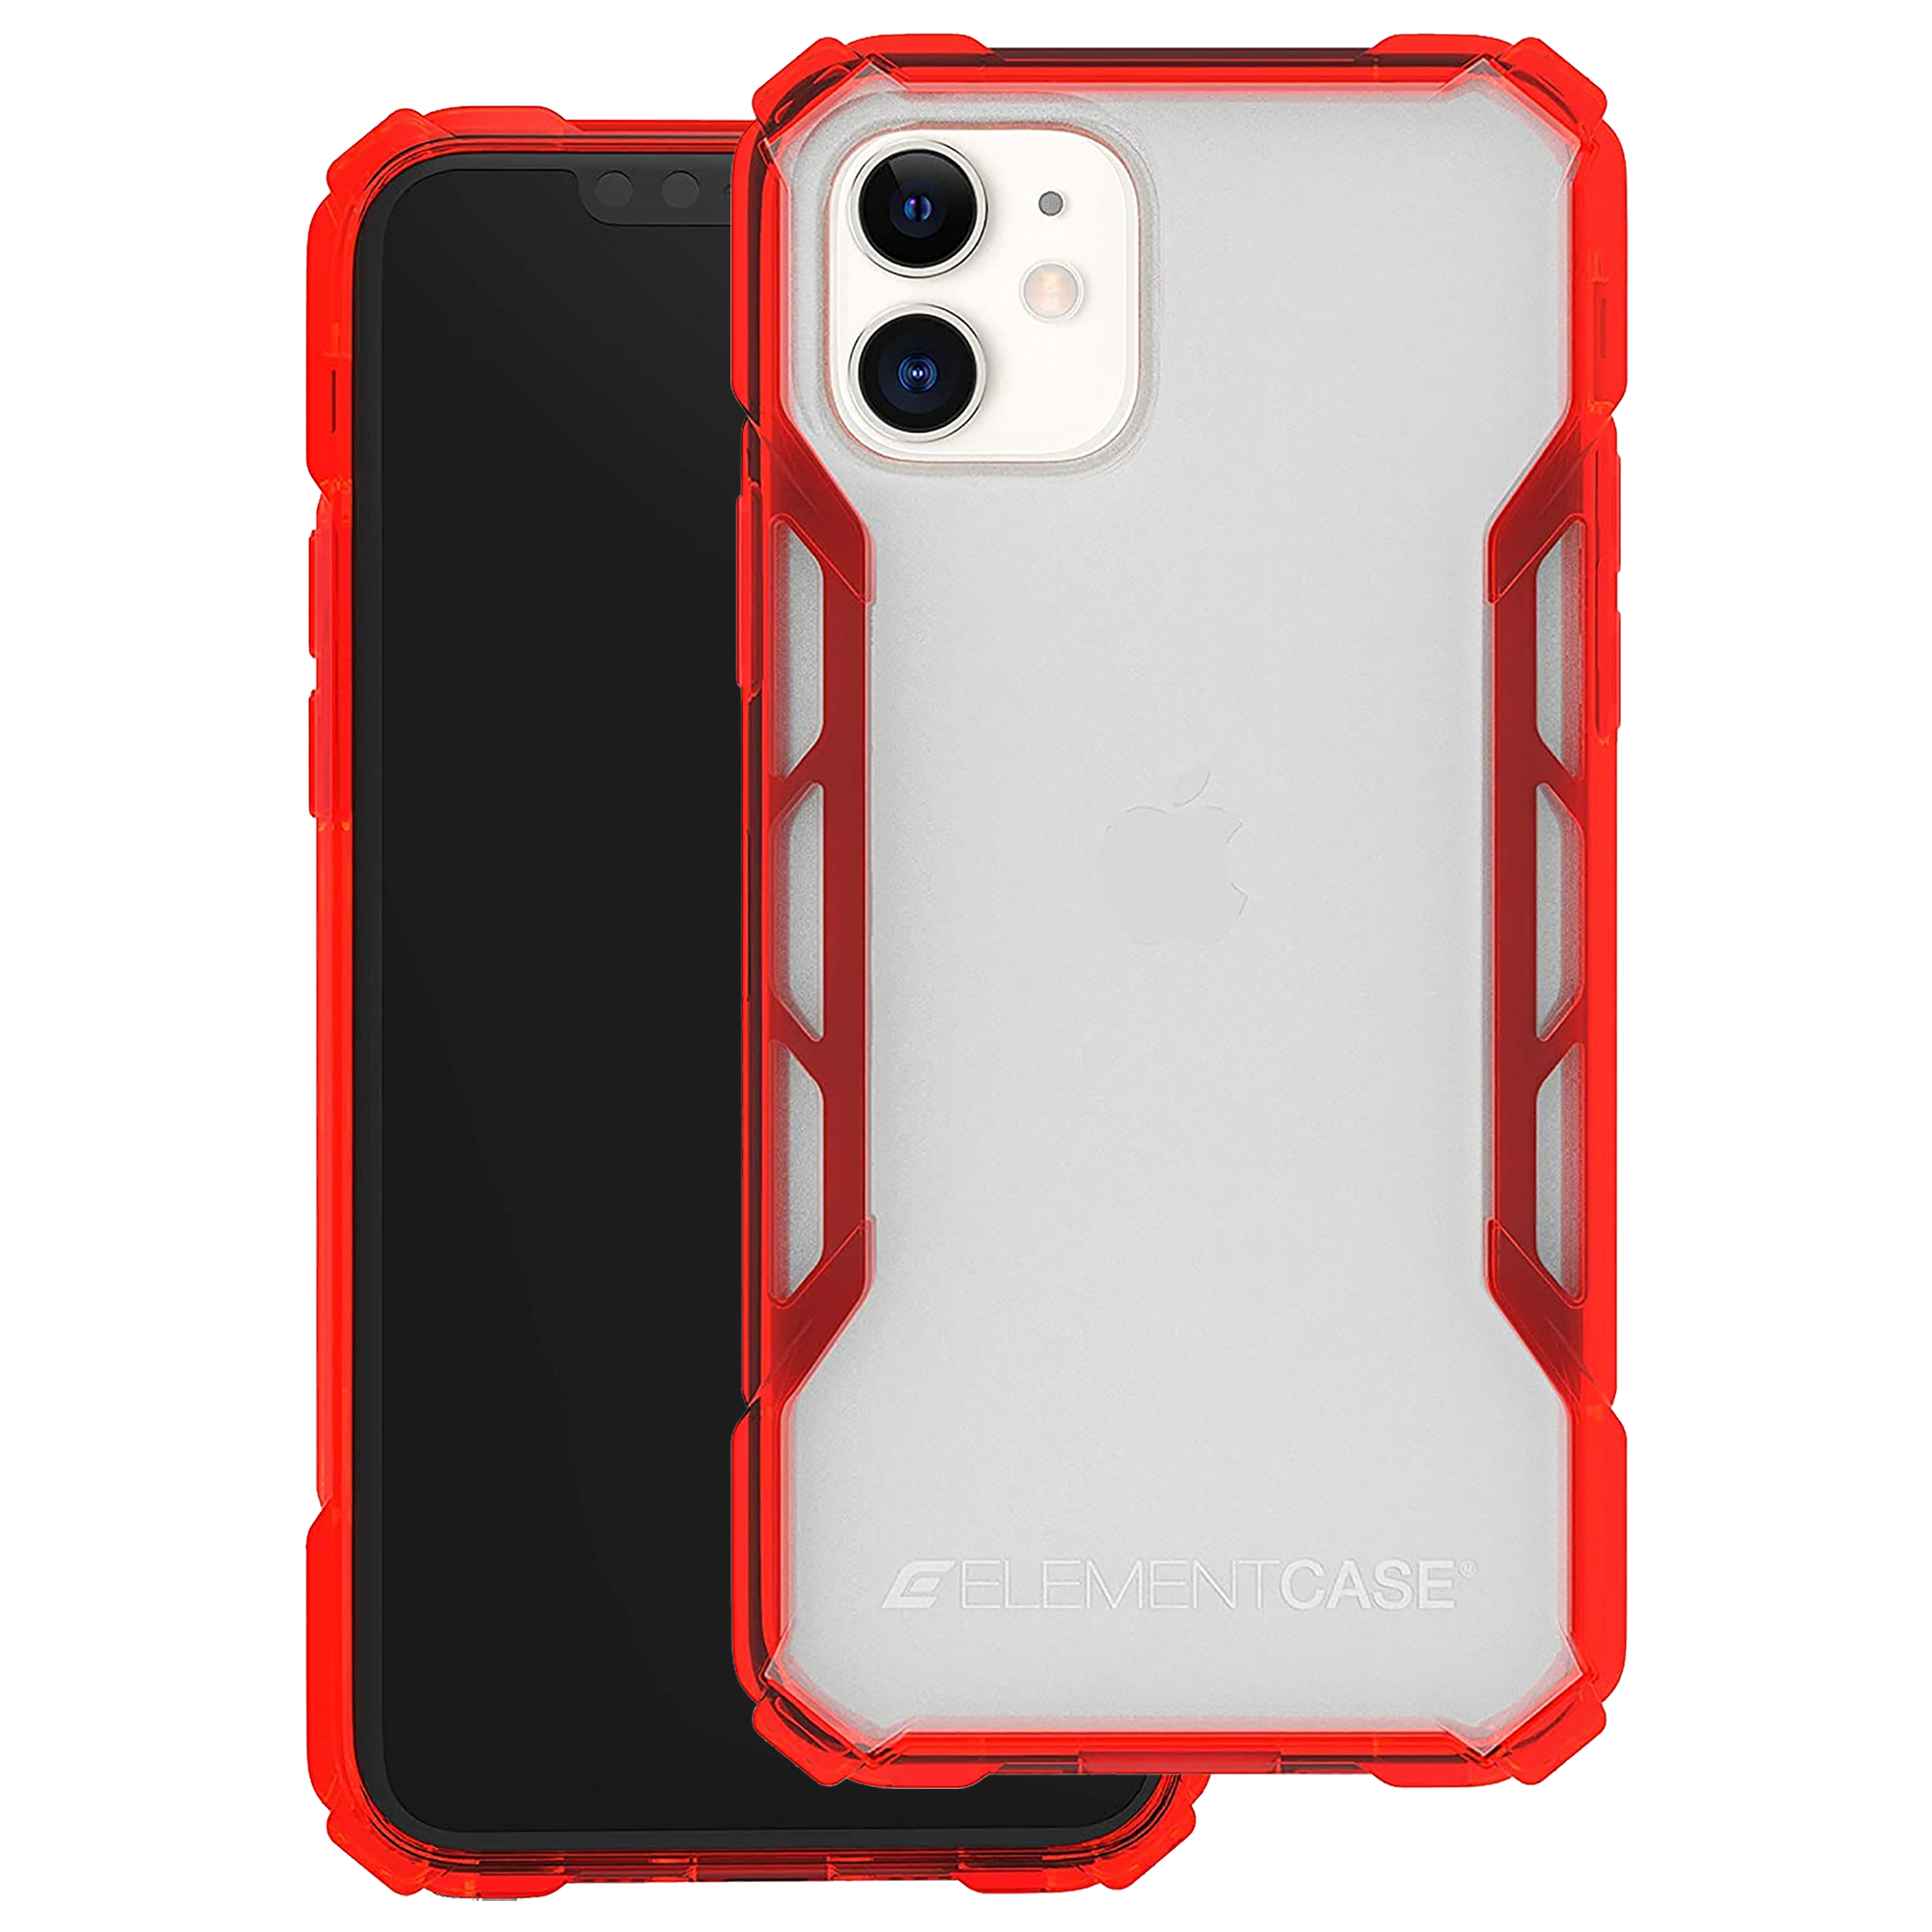 Element Case Rally Polycarbonate Back Case For iPhone 11 (Mil-Spec Drop Protection, EMT-322-225F-03, Red)_1